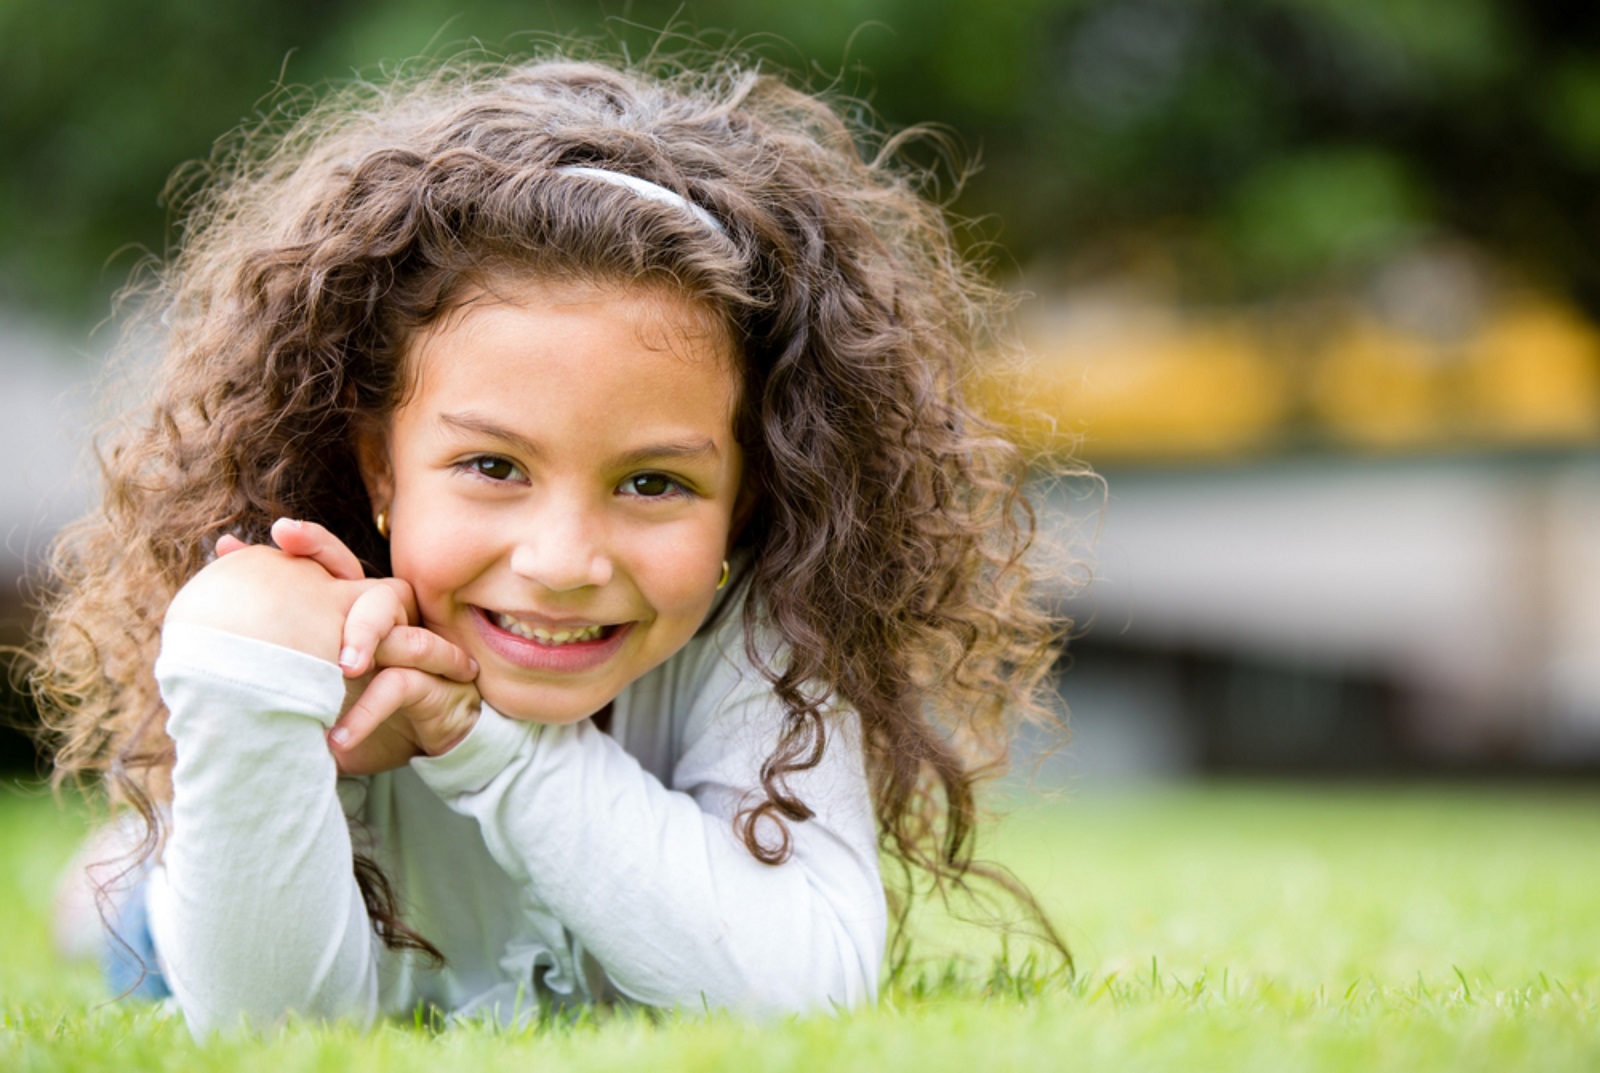 common childhood issues that orthodontists can tackle early